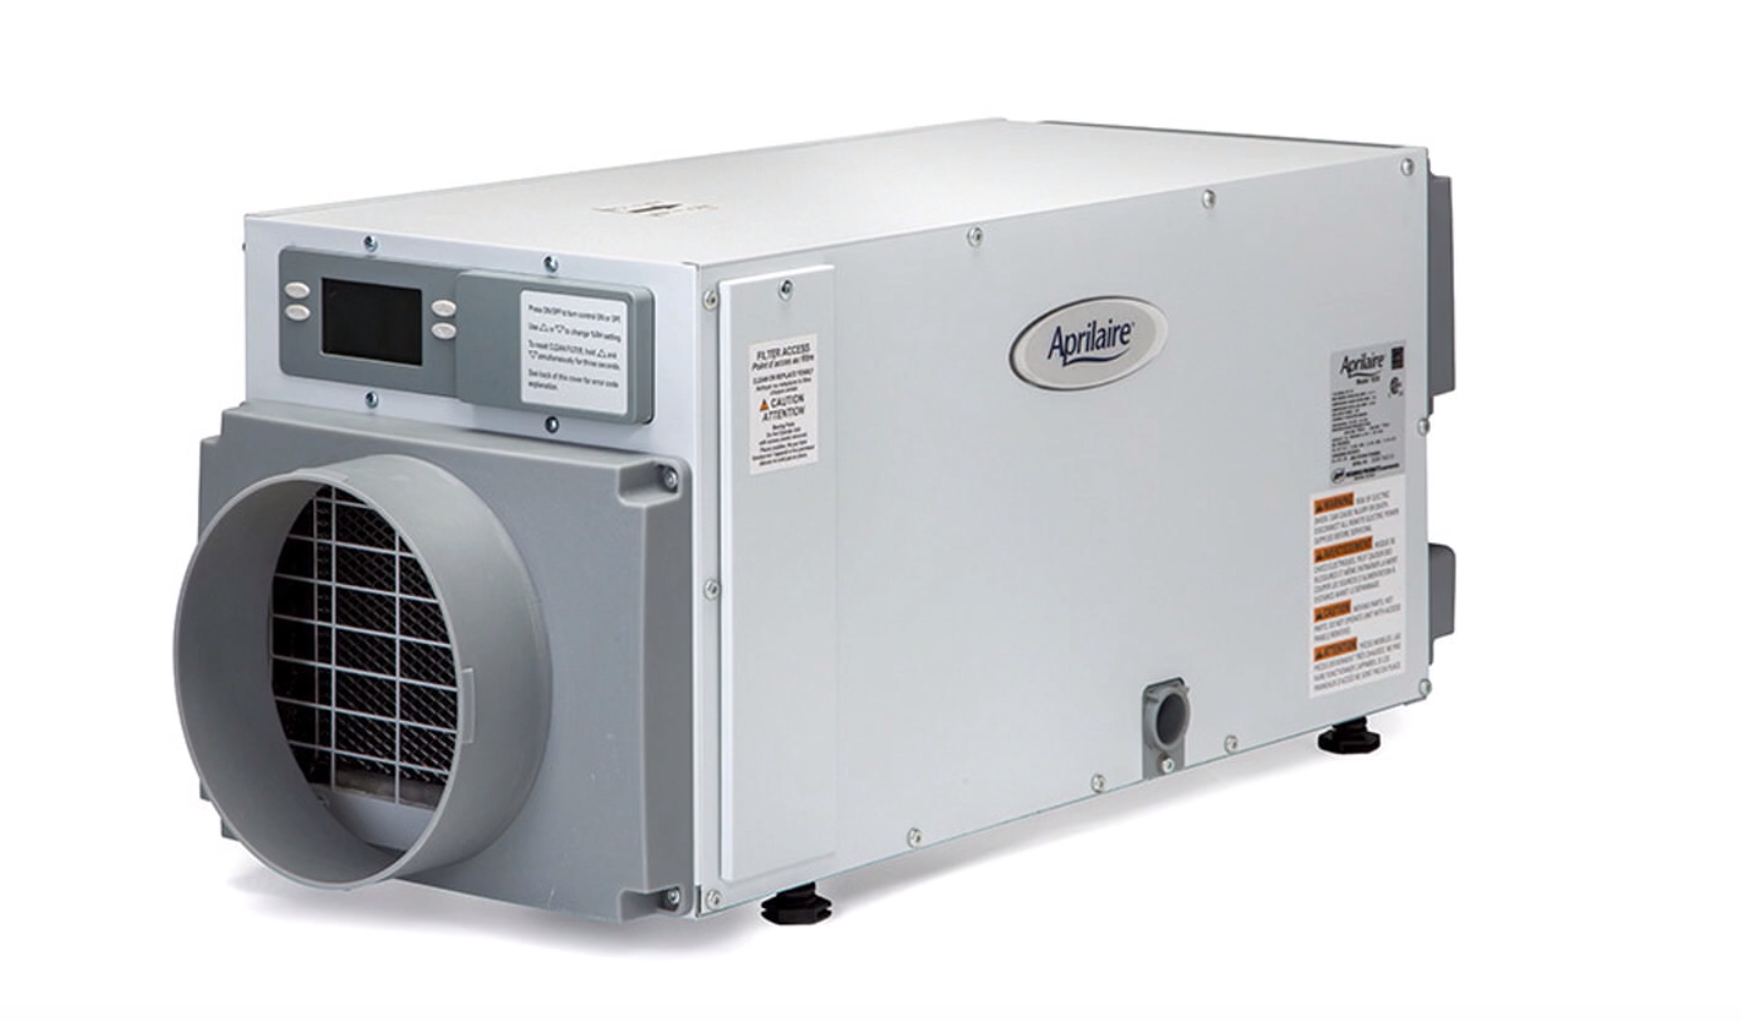 A dehumidifier can help keep your office or restaurant comfortable if you have an oversized ac unit